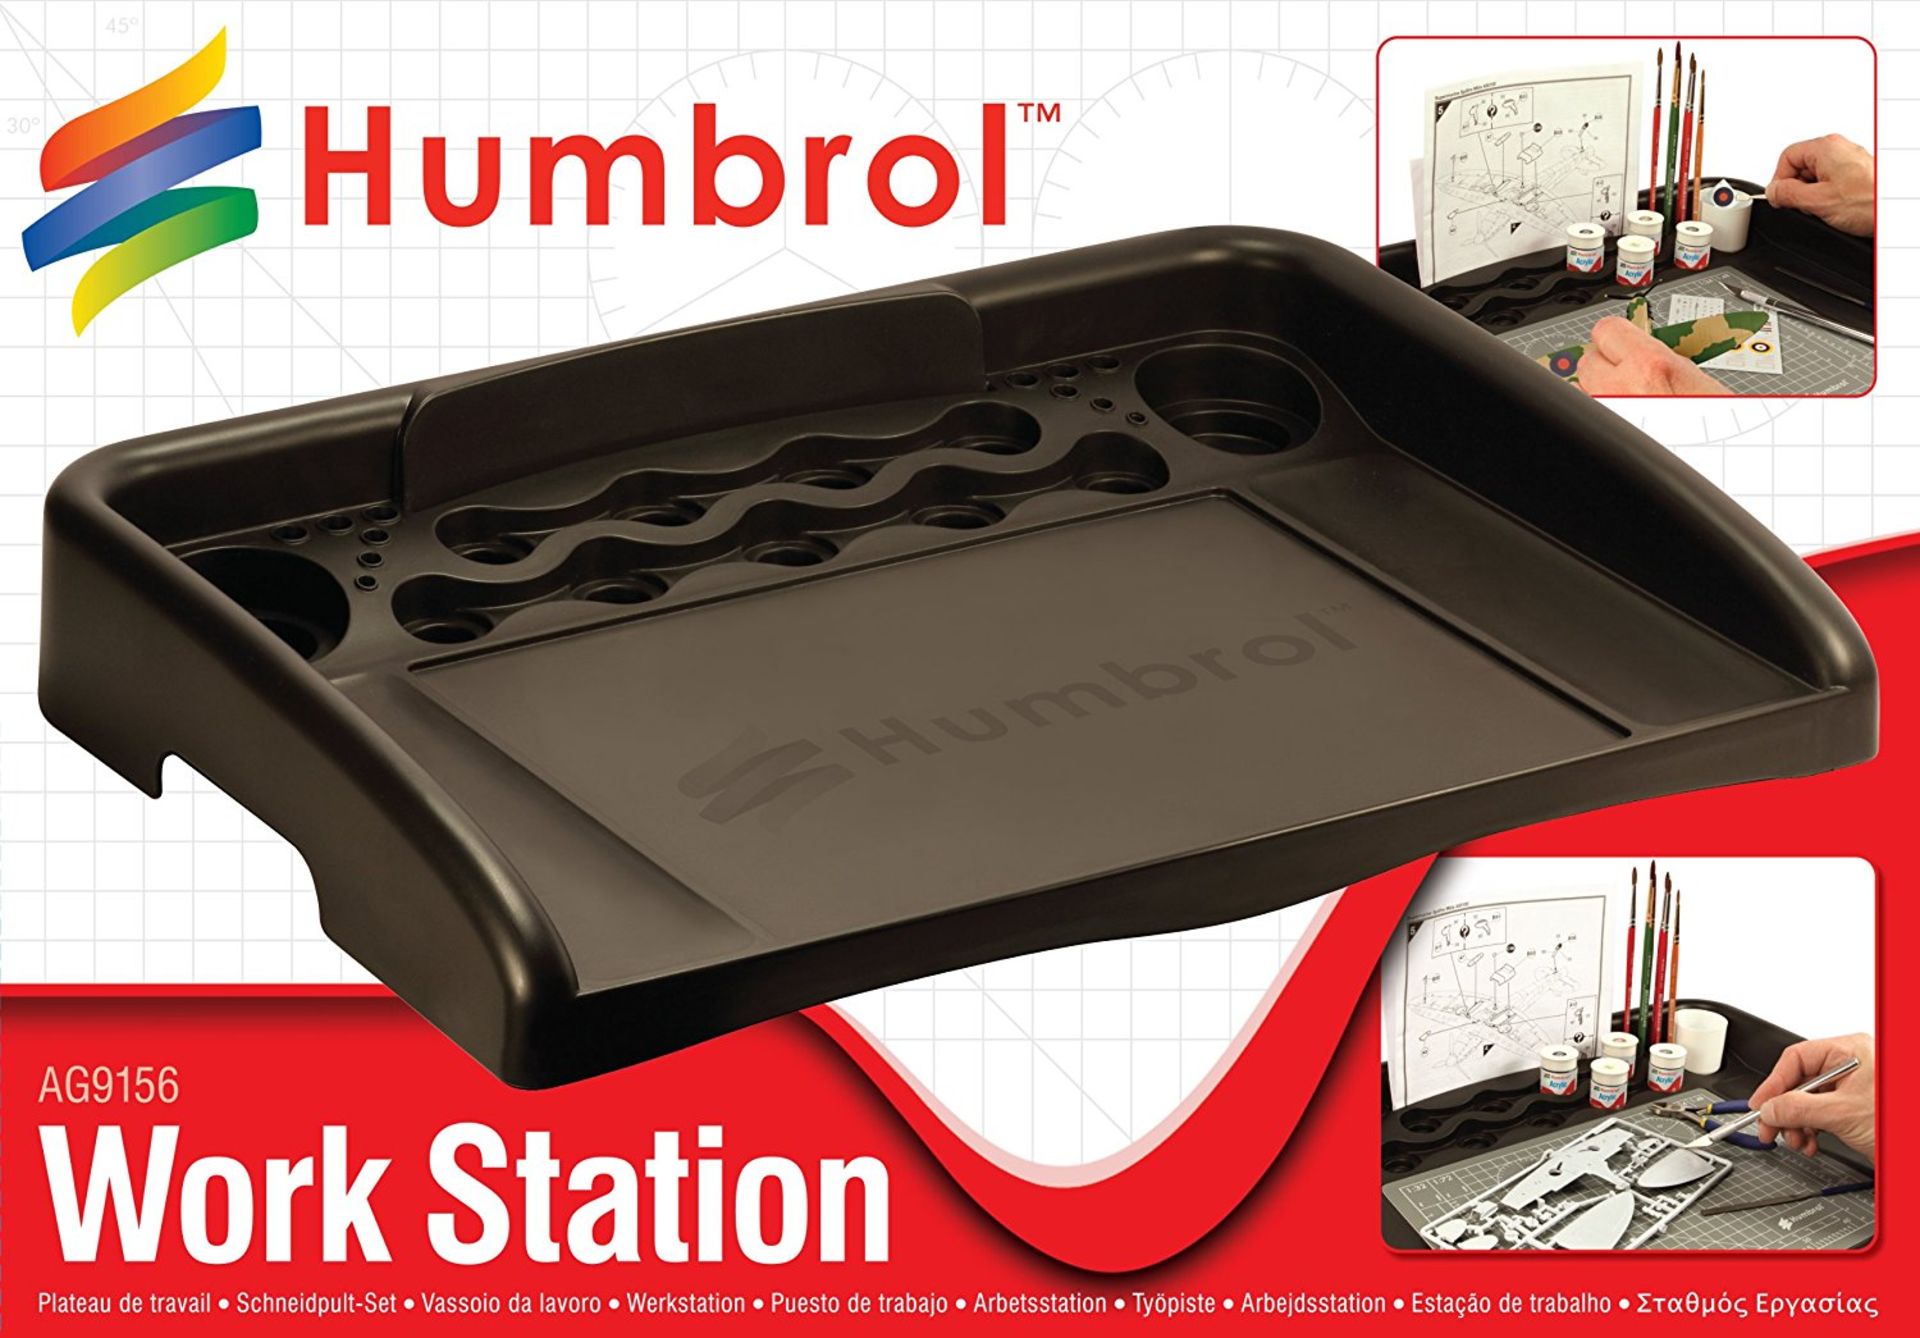 4 x Humbrol Work Station | 5010279391568 | RRP £ 79.96 - Image 3 of 3